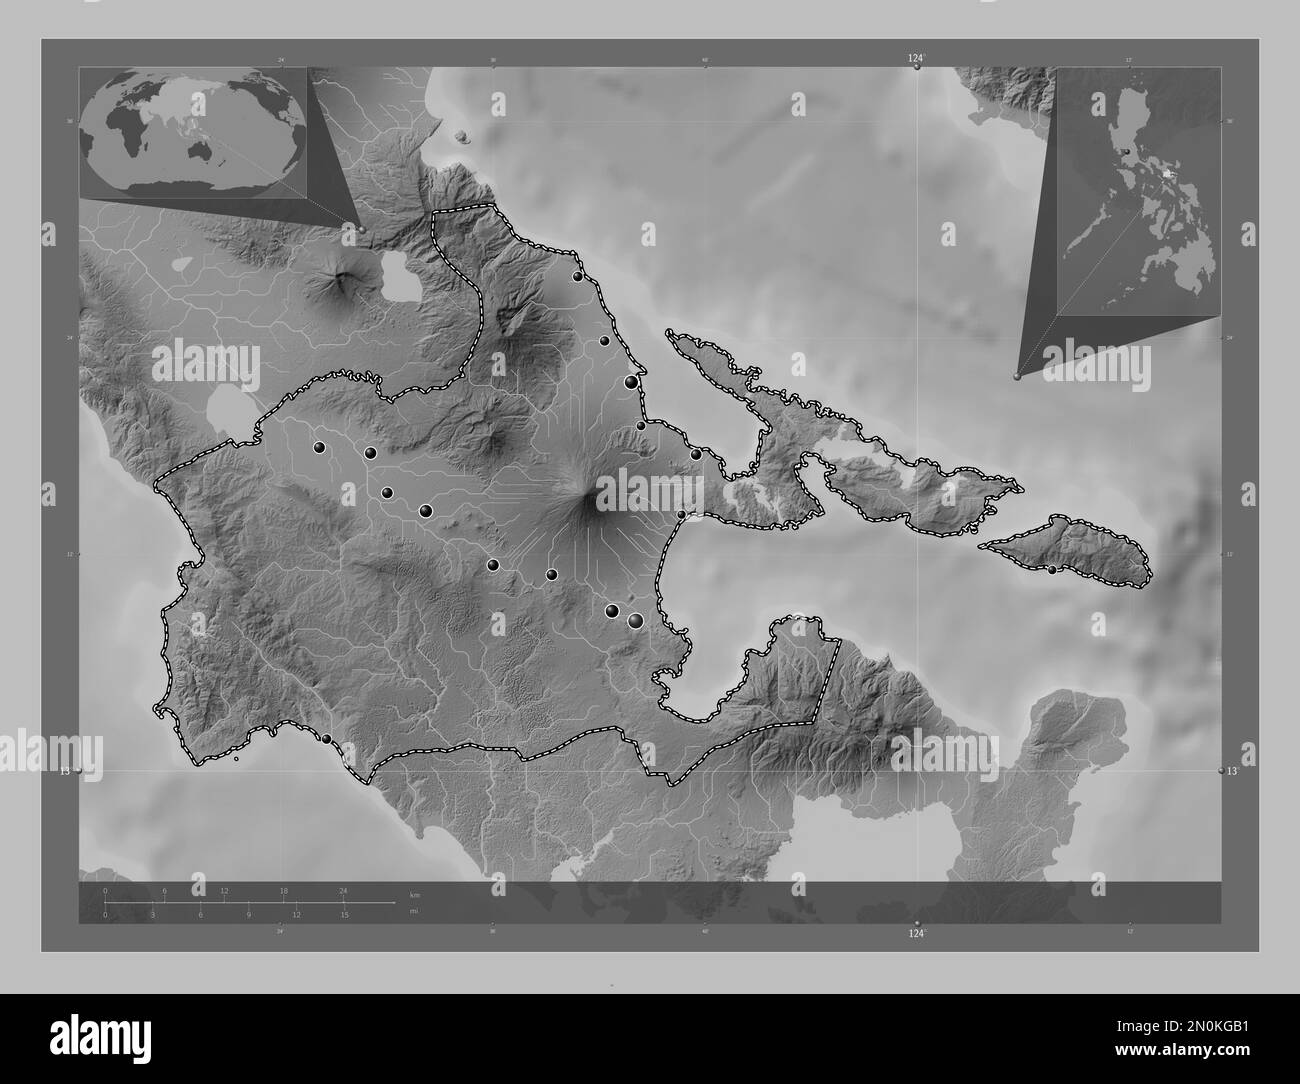 Albay, province of Philippines. Grayscale elevation map with lakes and rivers. Locations of major cities of the region. Corner auxiliary location maps Stock Photo